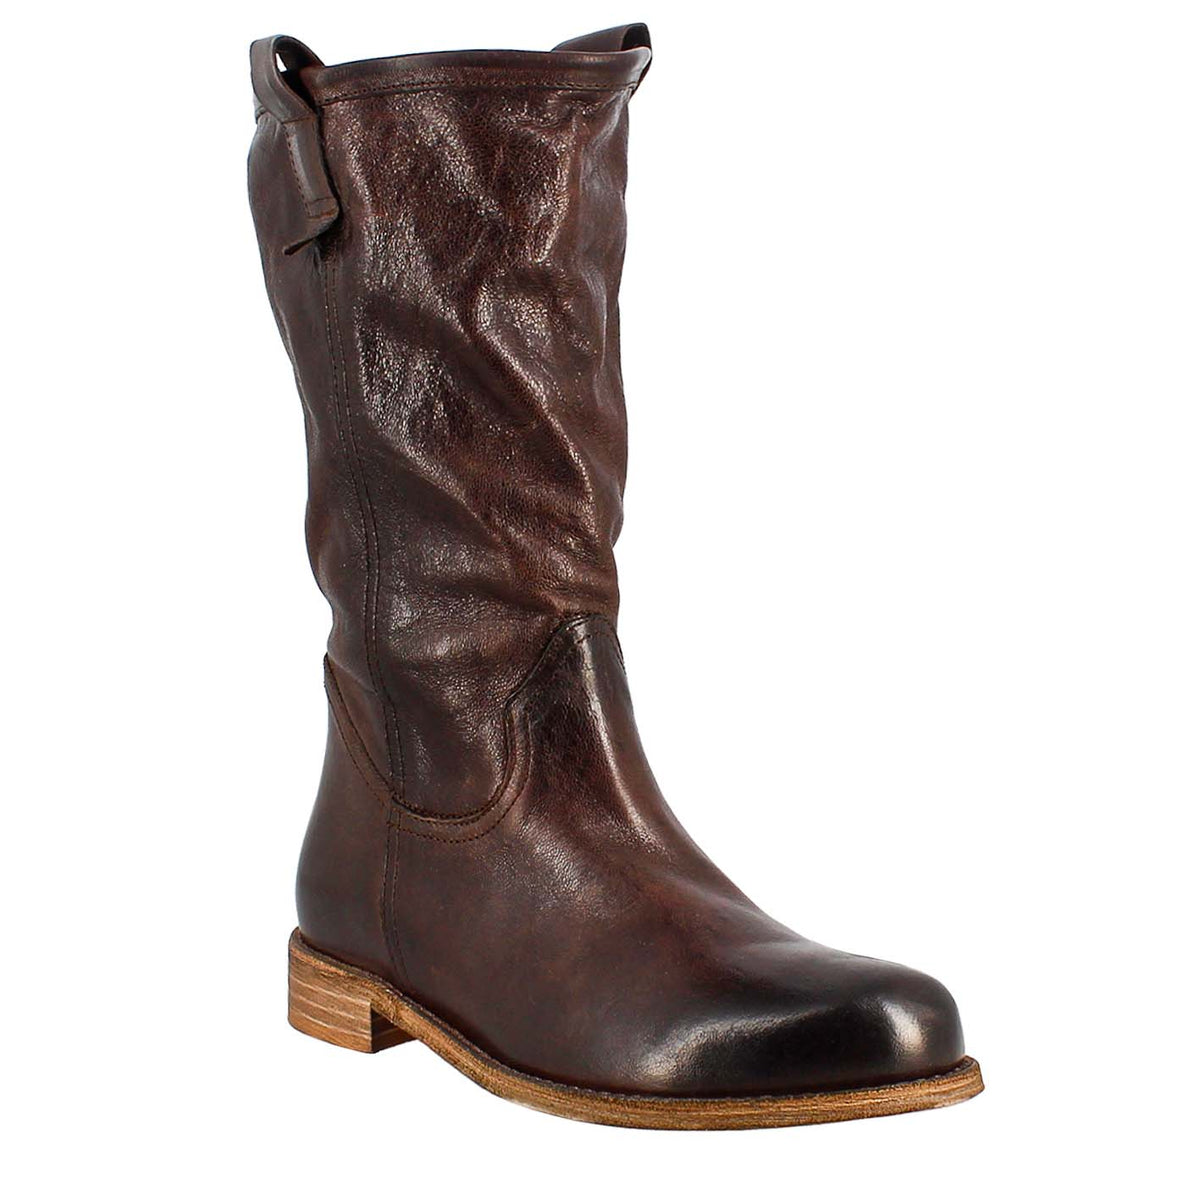 Women's calf-high boot in dark brown vintage leather, unlined